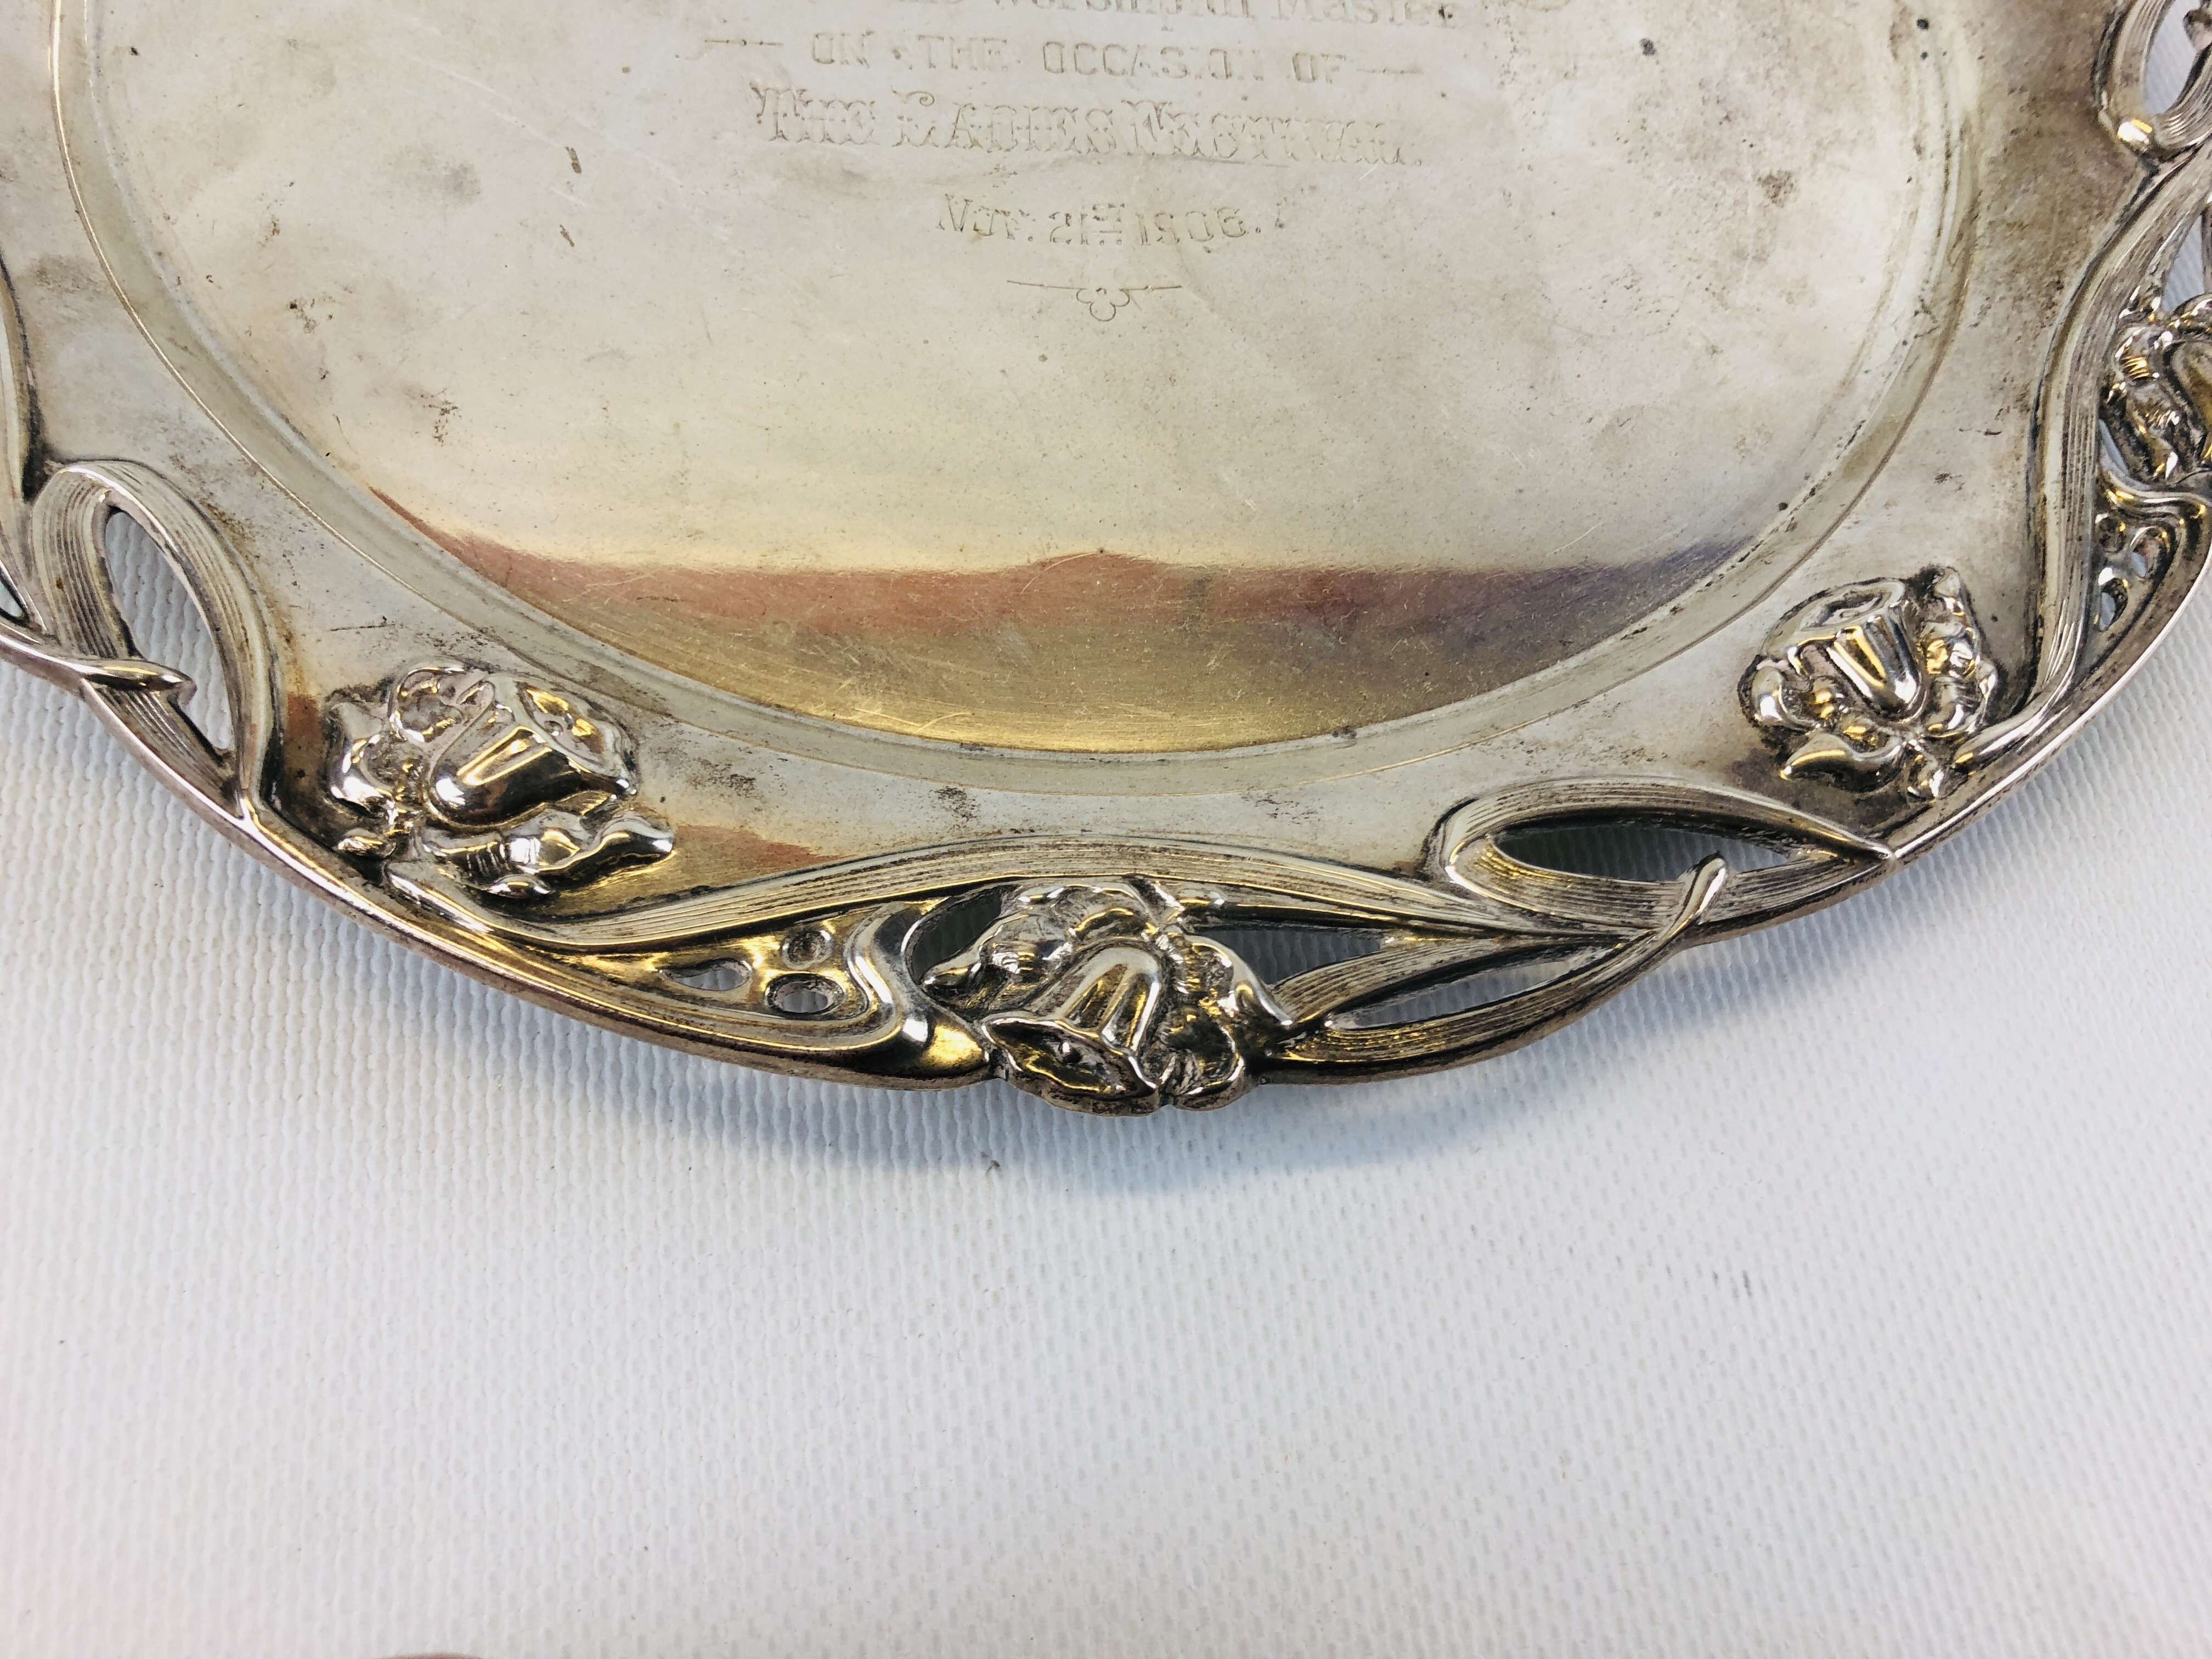 SILVER SALVER PEARCE BORDER AND ENGRAVED WILLIAM HUTTON AND SON SHEFFIELD 1905. - Image 4 of 11